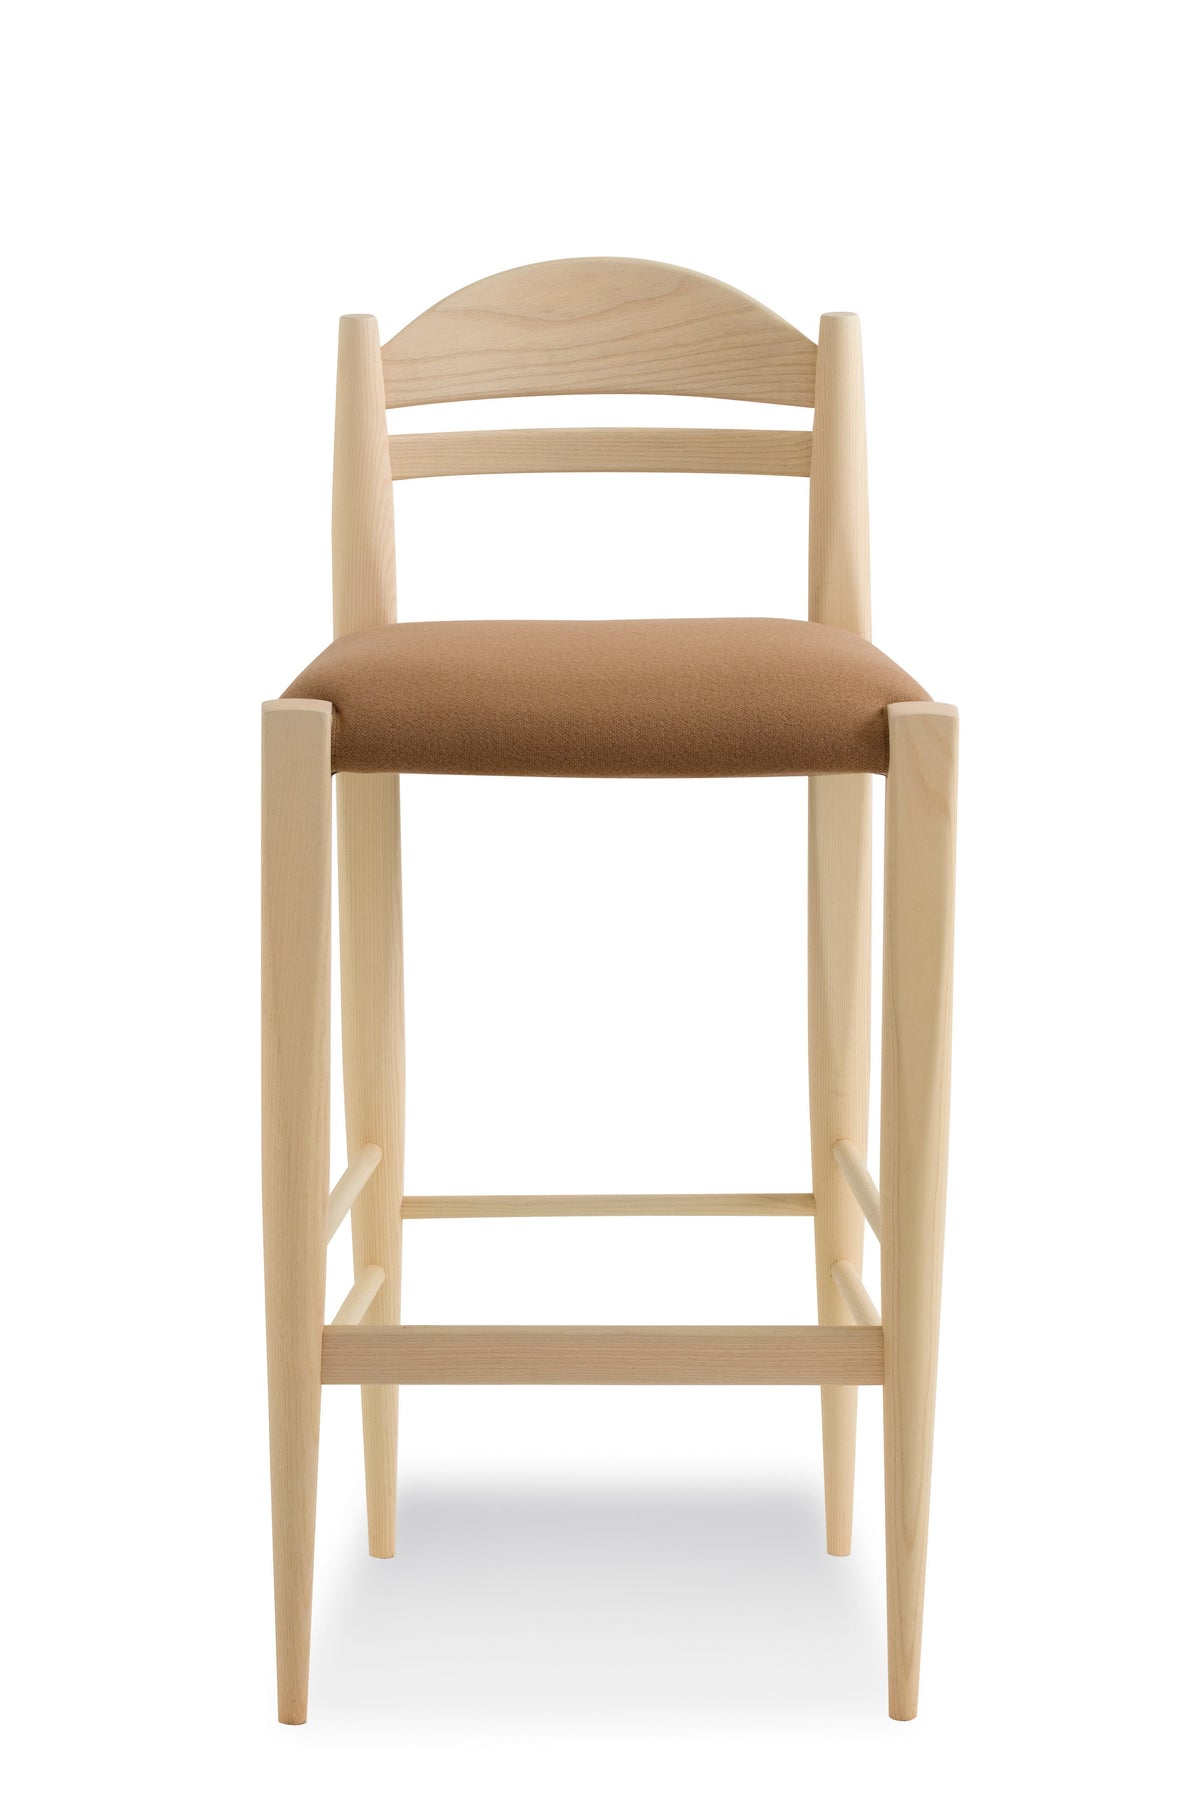 Vincent V.G. 444 High Stool-Billiani-Contract Furniture Store